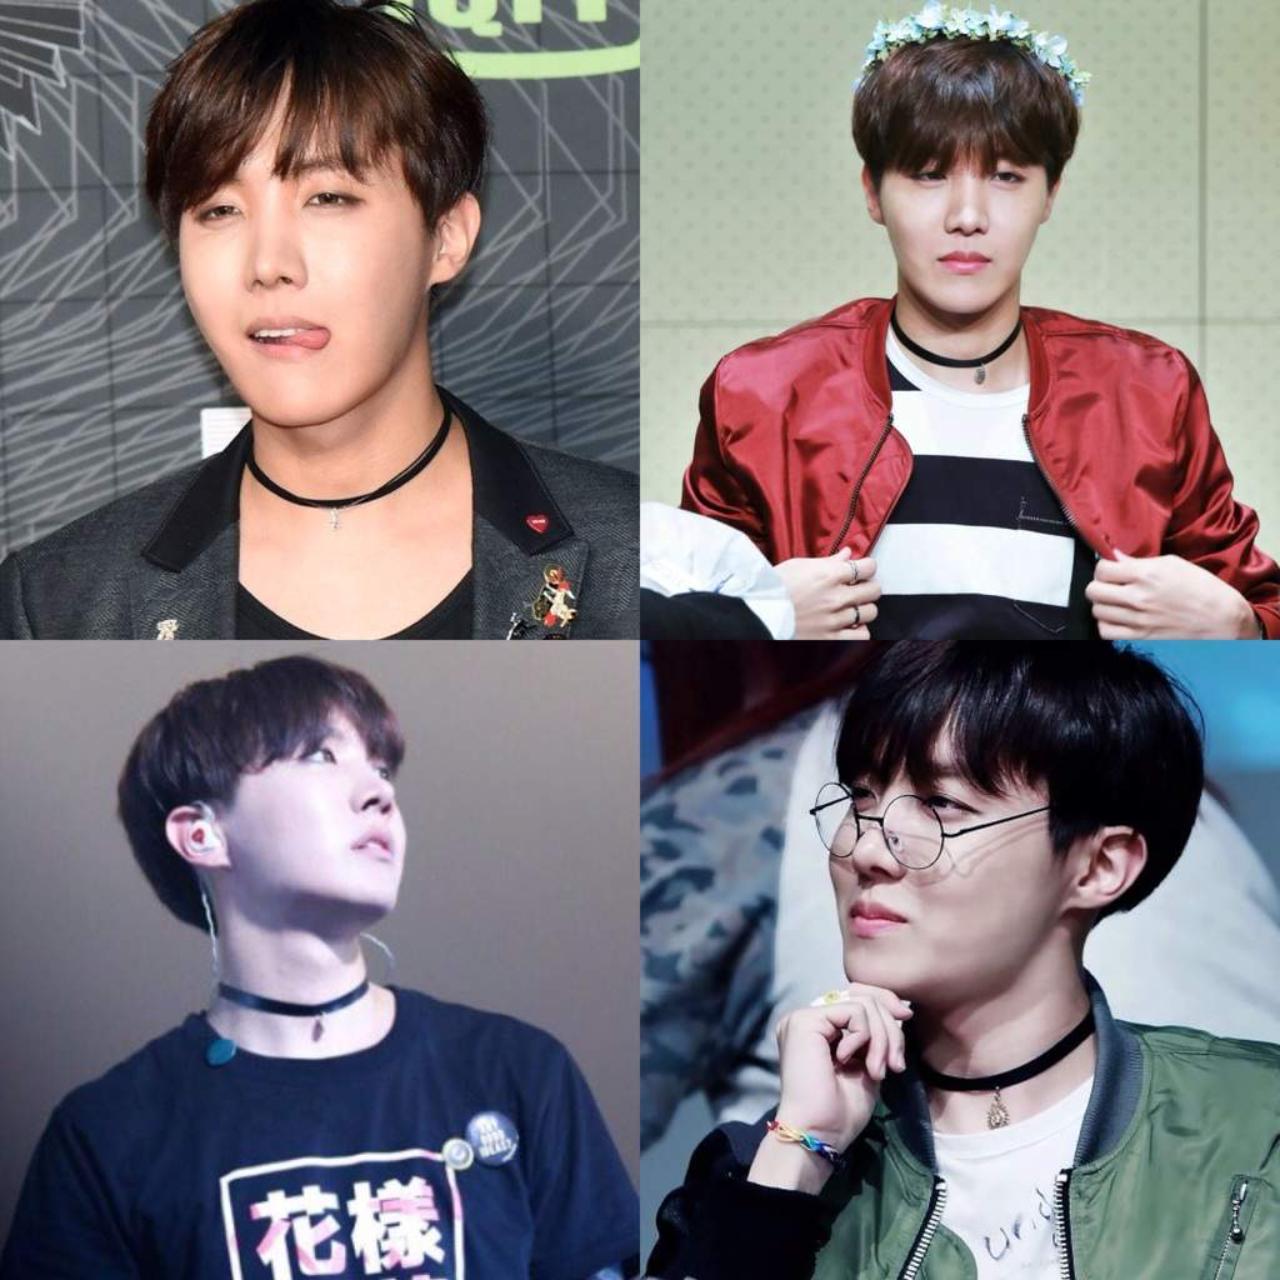 J-Hope: A look at BTS' most fashion forward member's extravagance